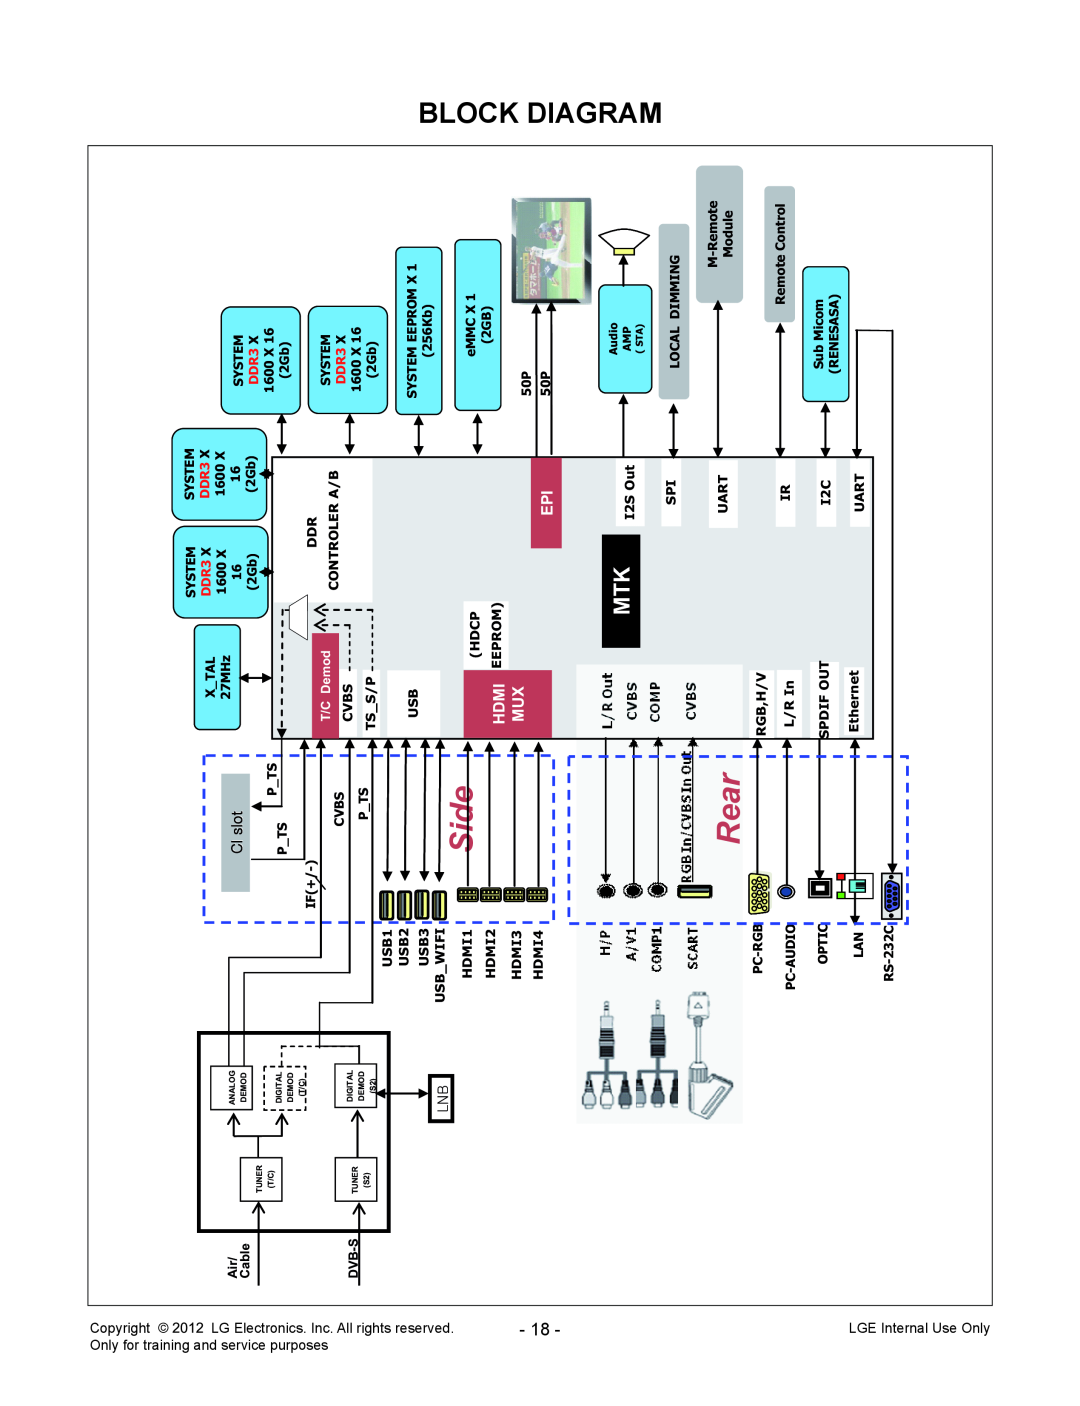 LG Electronics MFL67360901 Block Diagram, Side, Rear, Hdmi, Copyright, All rights reserved, LGE Internal Use Only, USB1 